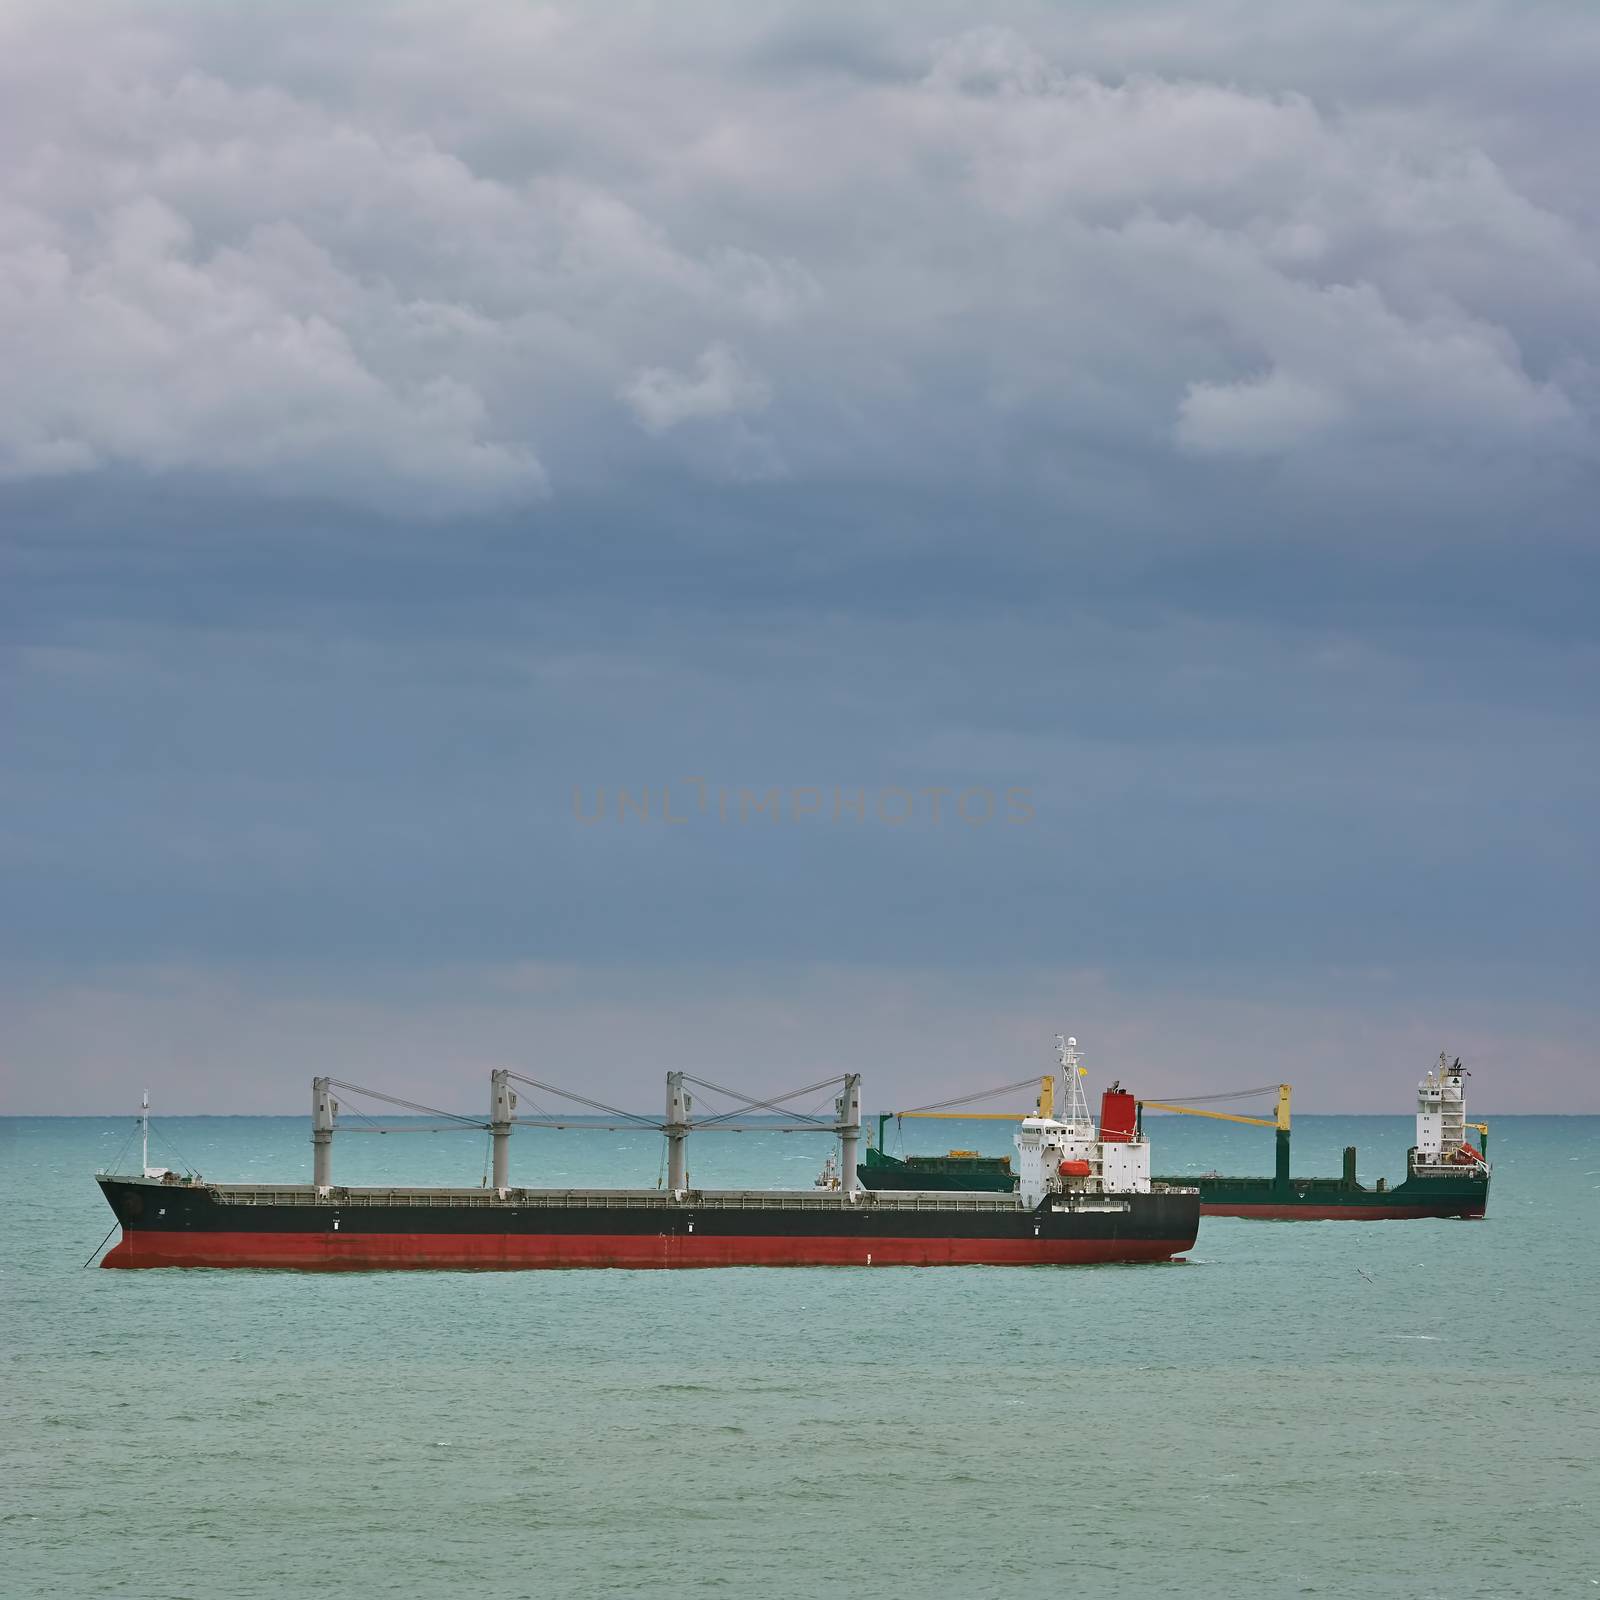 Dry Cargo Ships at Anchorage in the Black Sea Bay